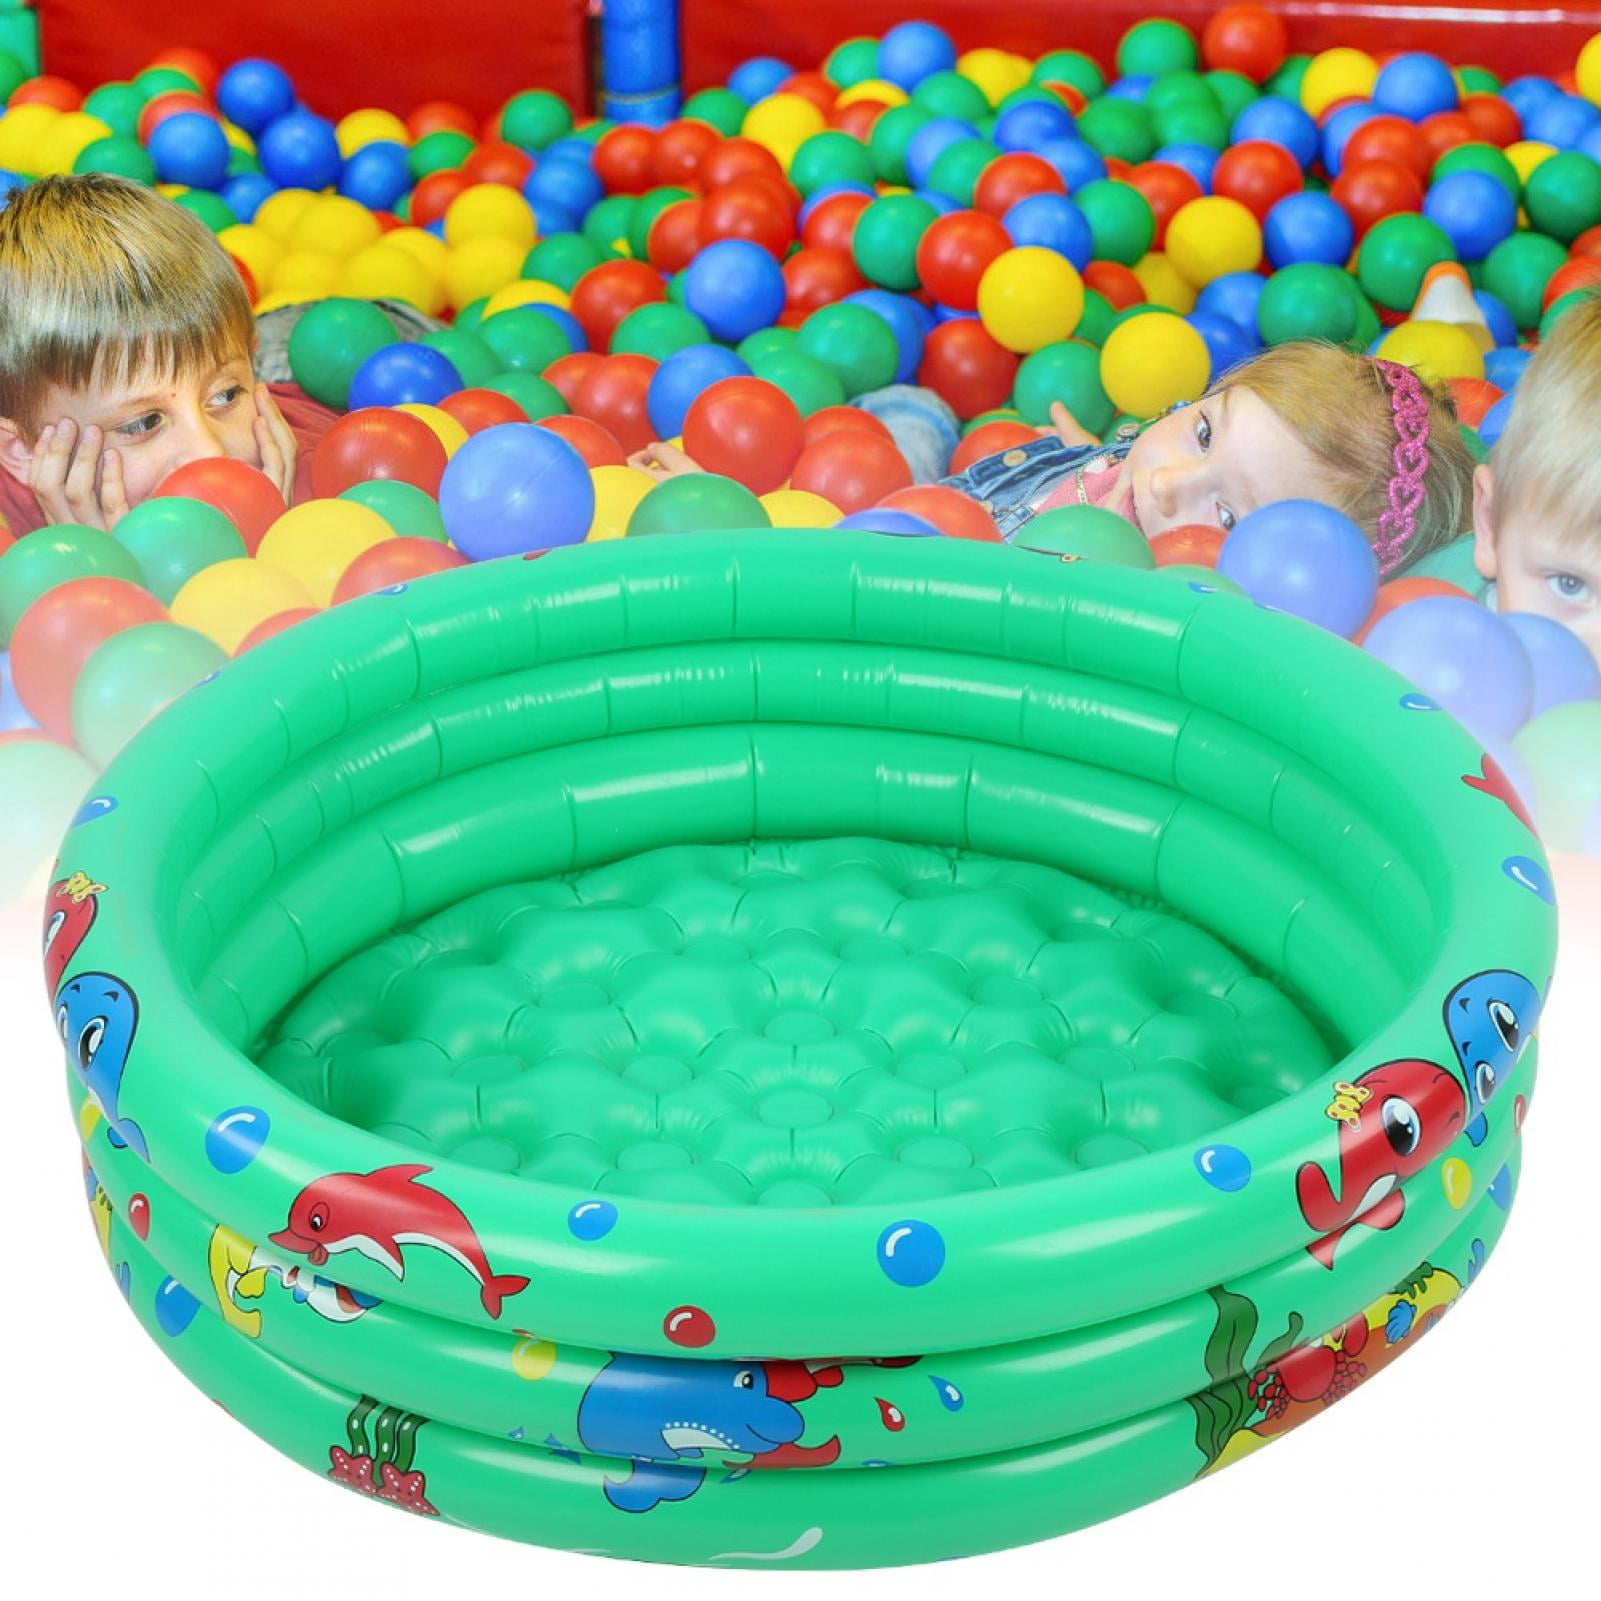 150cm 60" Inflatable Swimming Pool Ball Pit Baby Kids Outdoor Indoor Party Green 